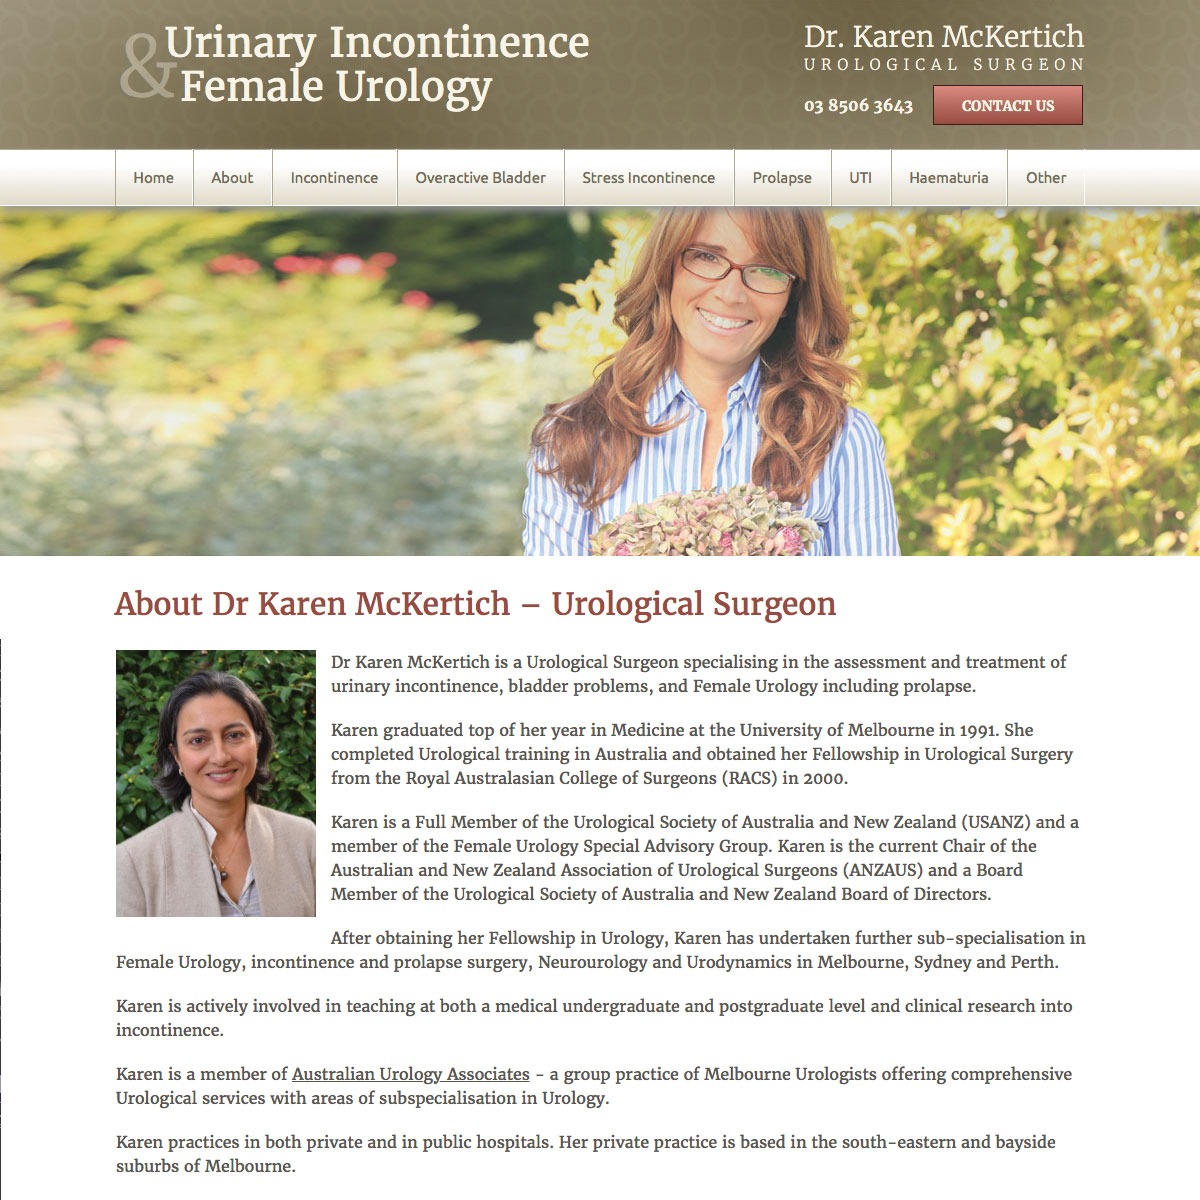 Urinary Incontinence and Female Urology - About